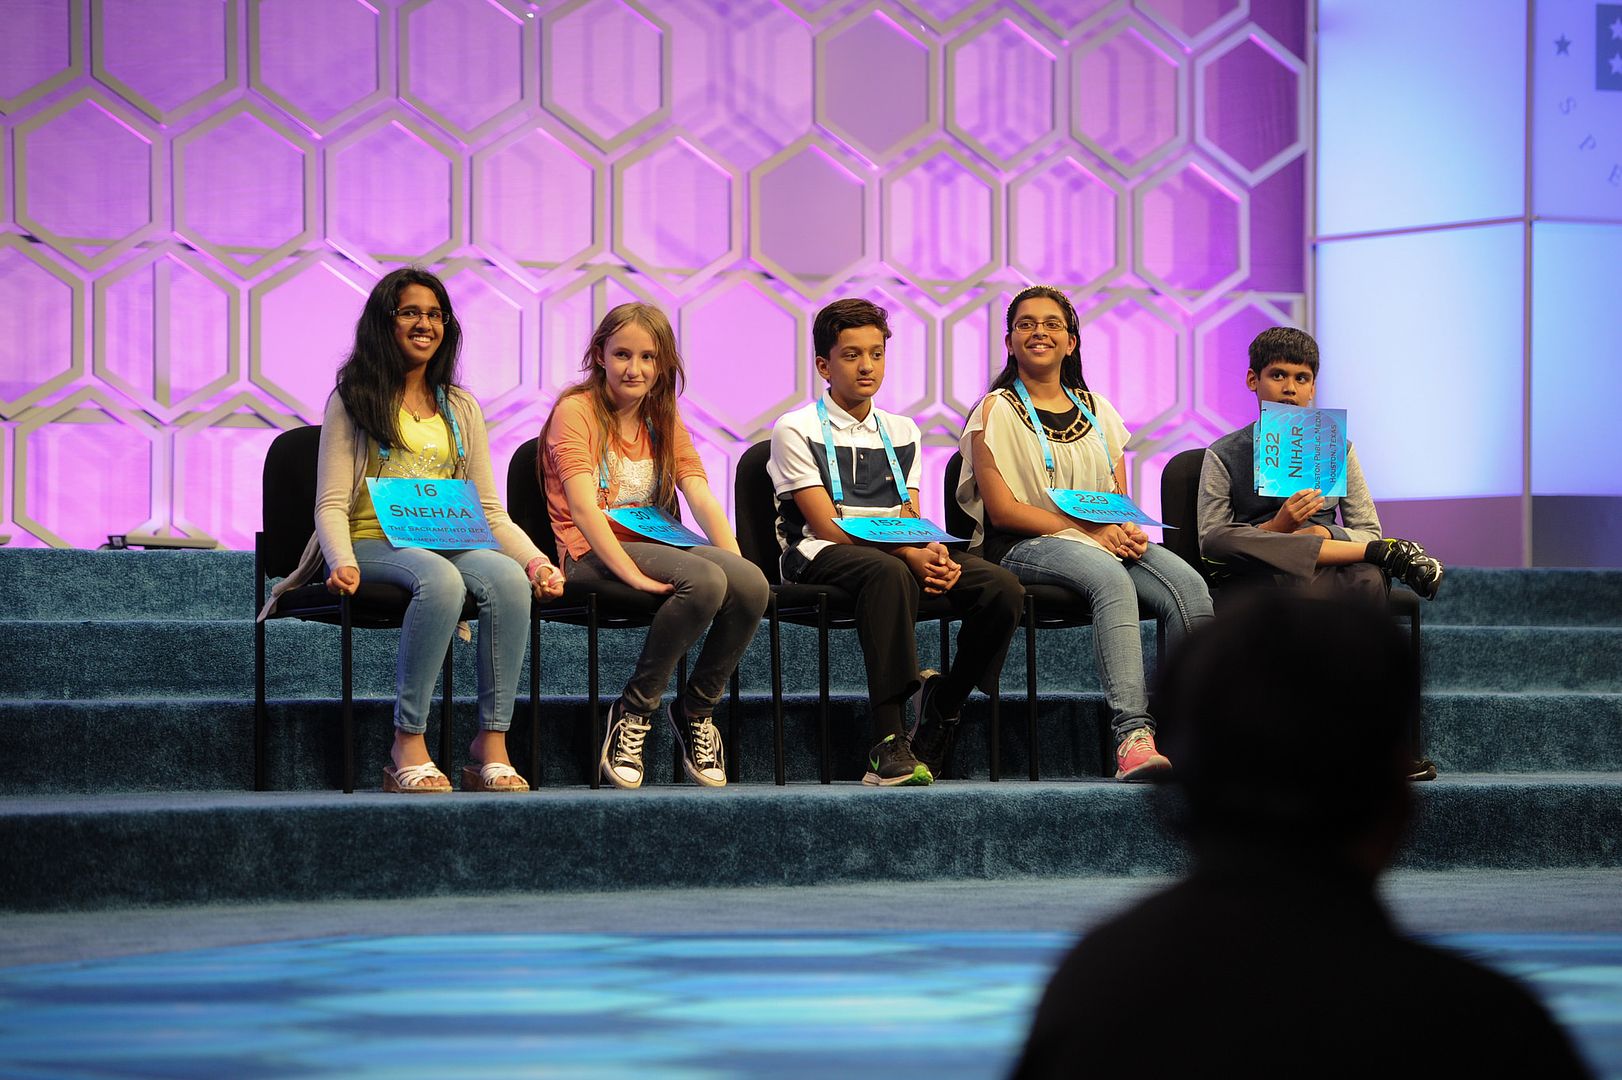 The 5 National Spelling Bee finalists of 2016